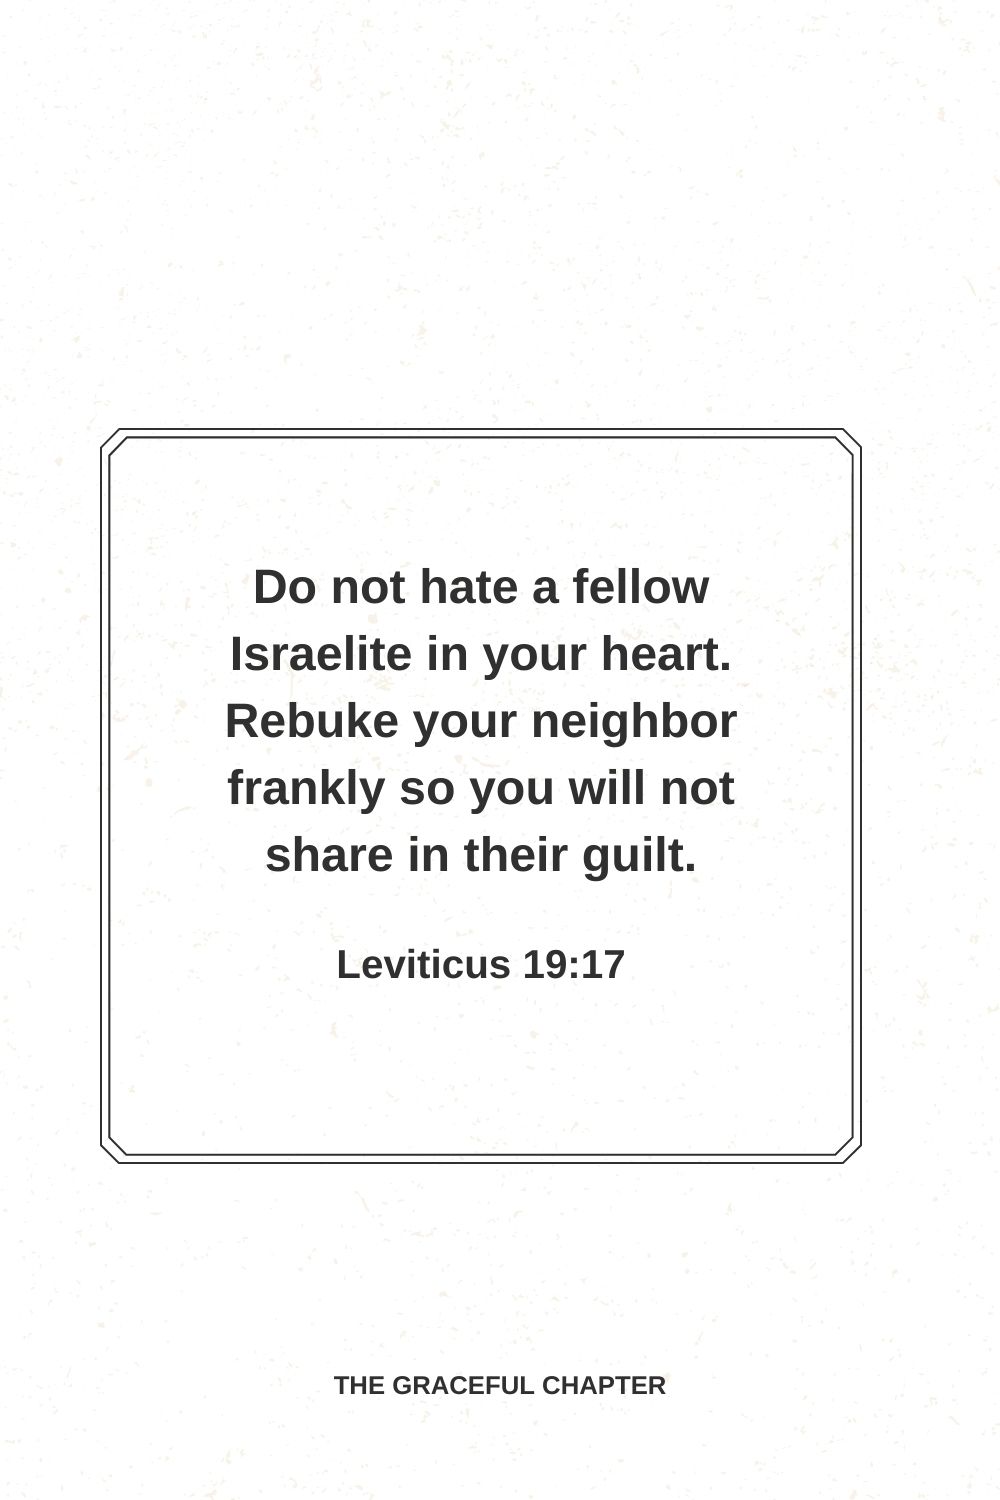 Do not hate a fellow Israelite in your heart. Rebuke your neighbor frankly so you will not share in their guilt. Leviticus 19:17